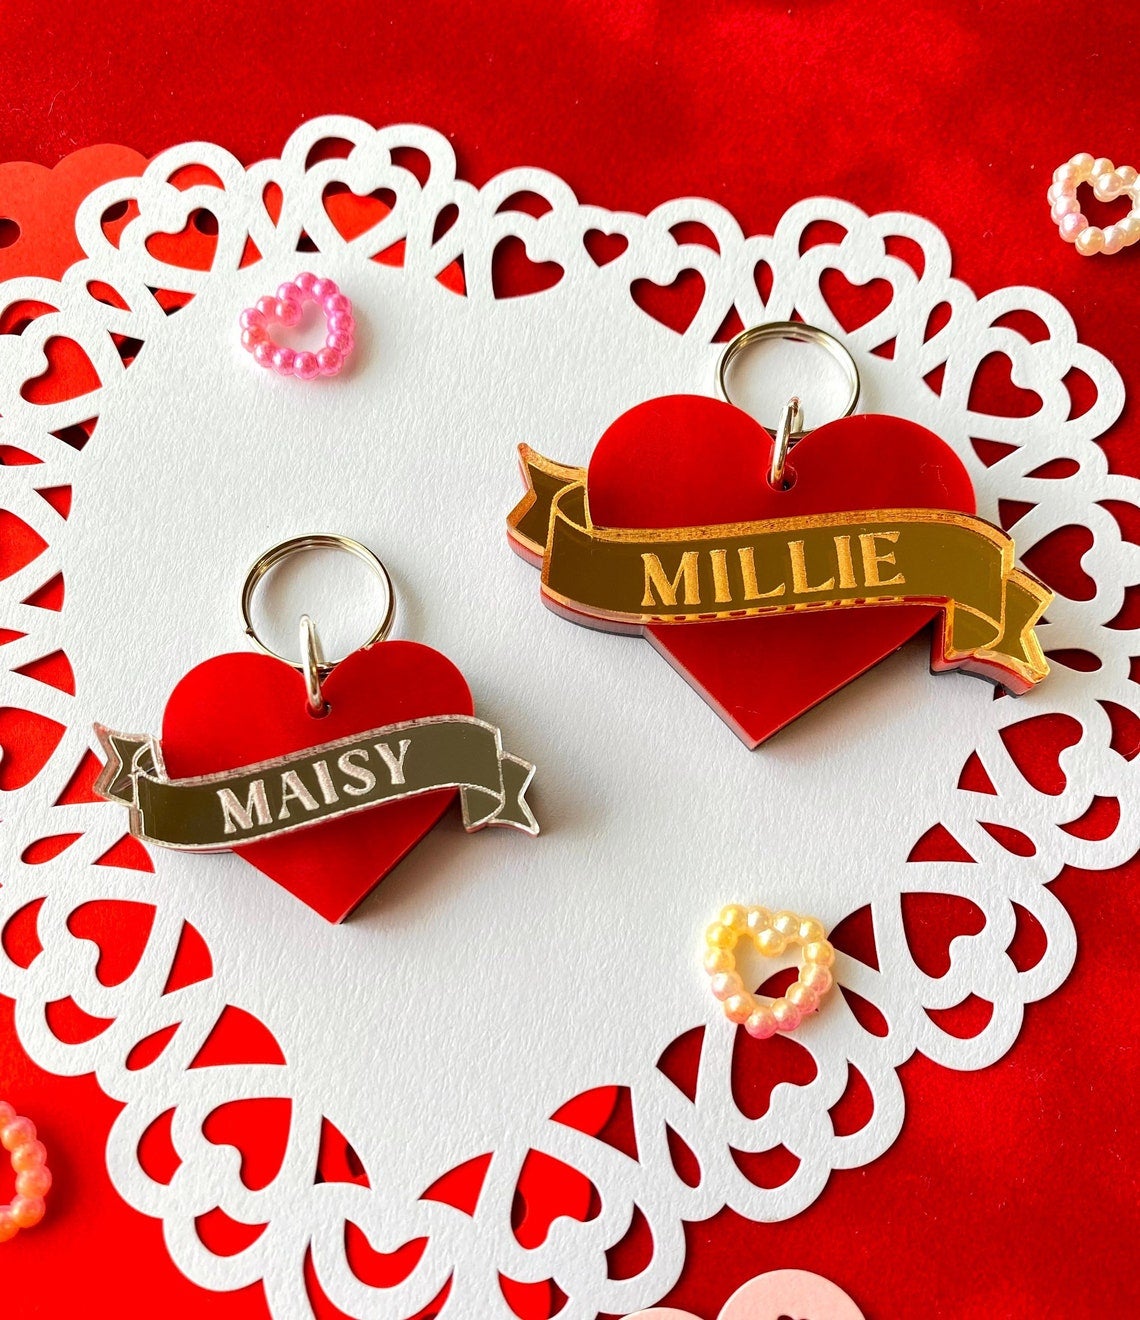 acrylic charms that look like the classic heart tattoos with the banners that say mom but in this case they said maisy and millie